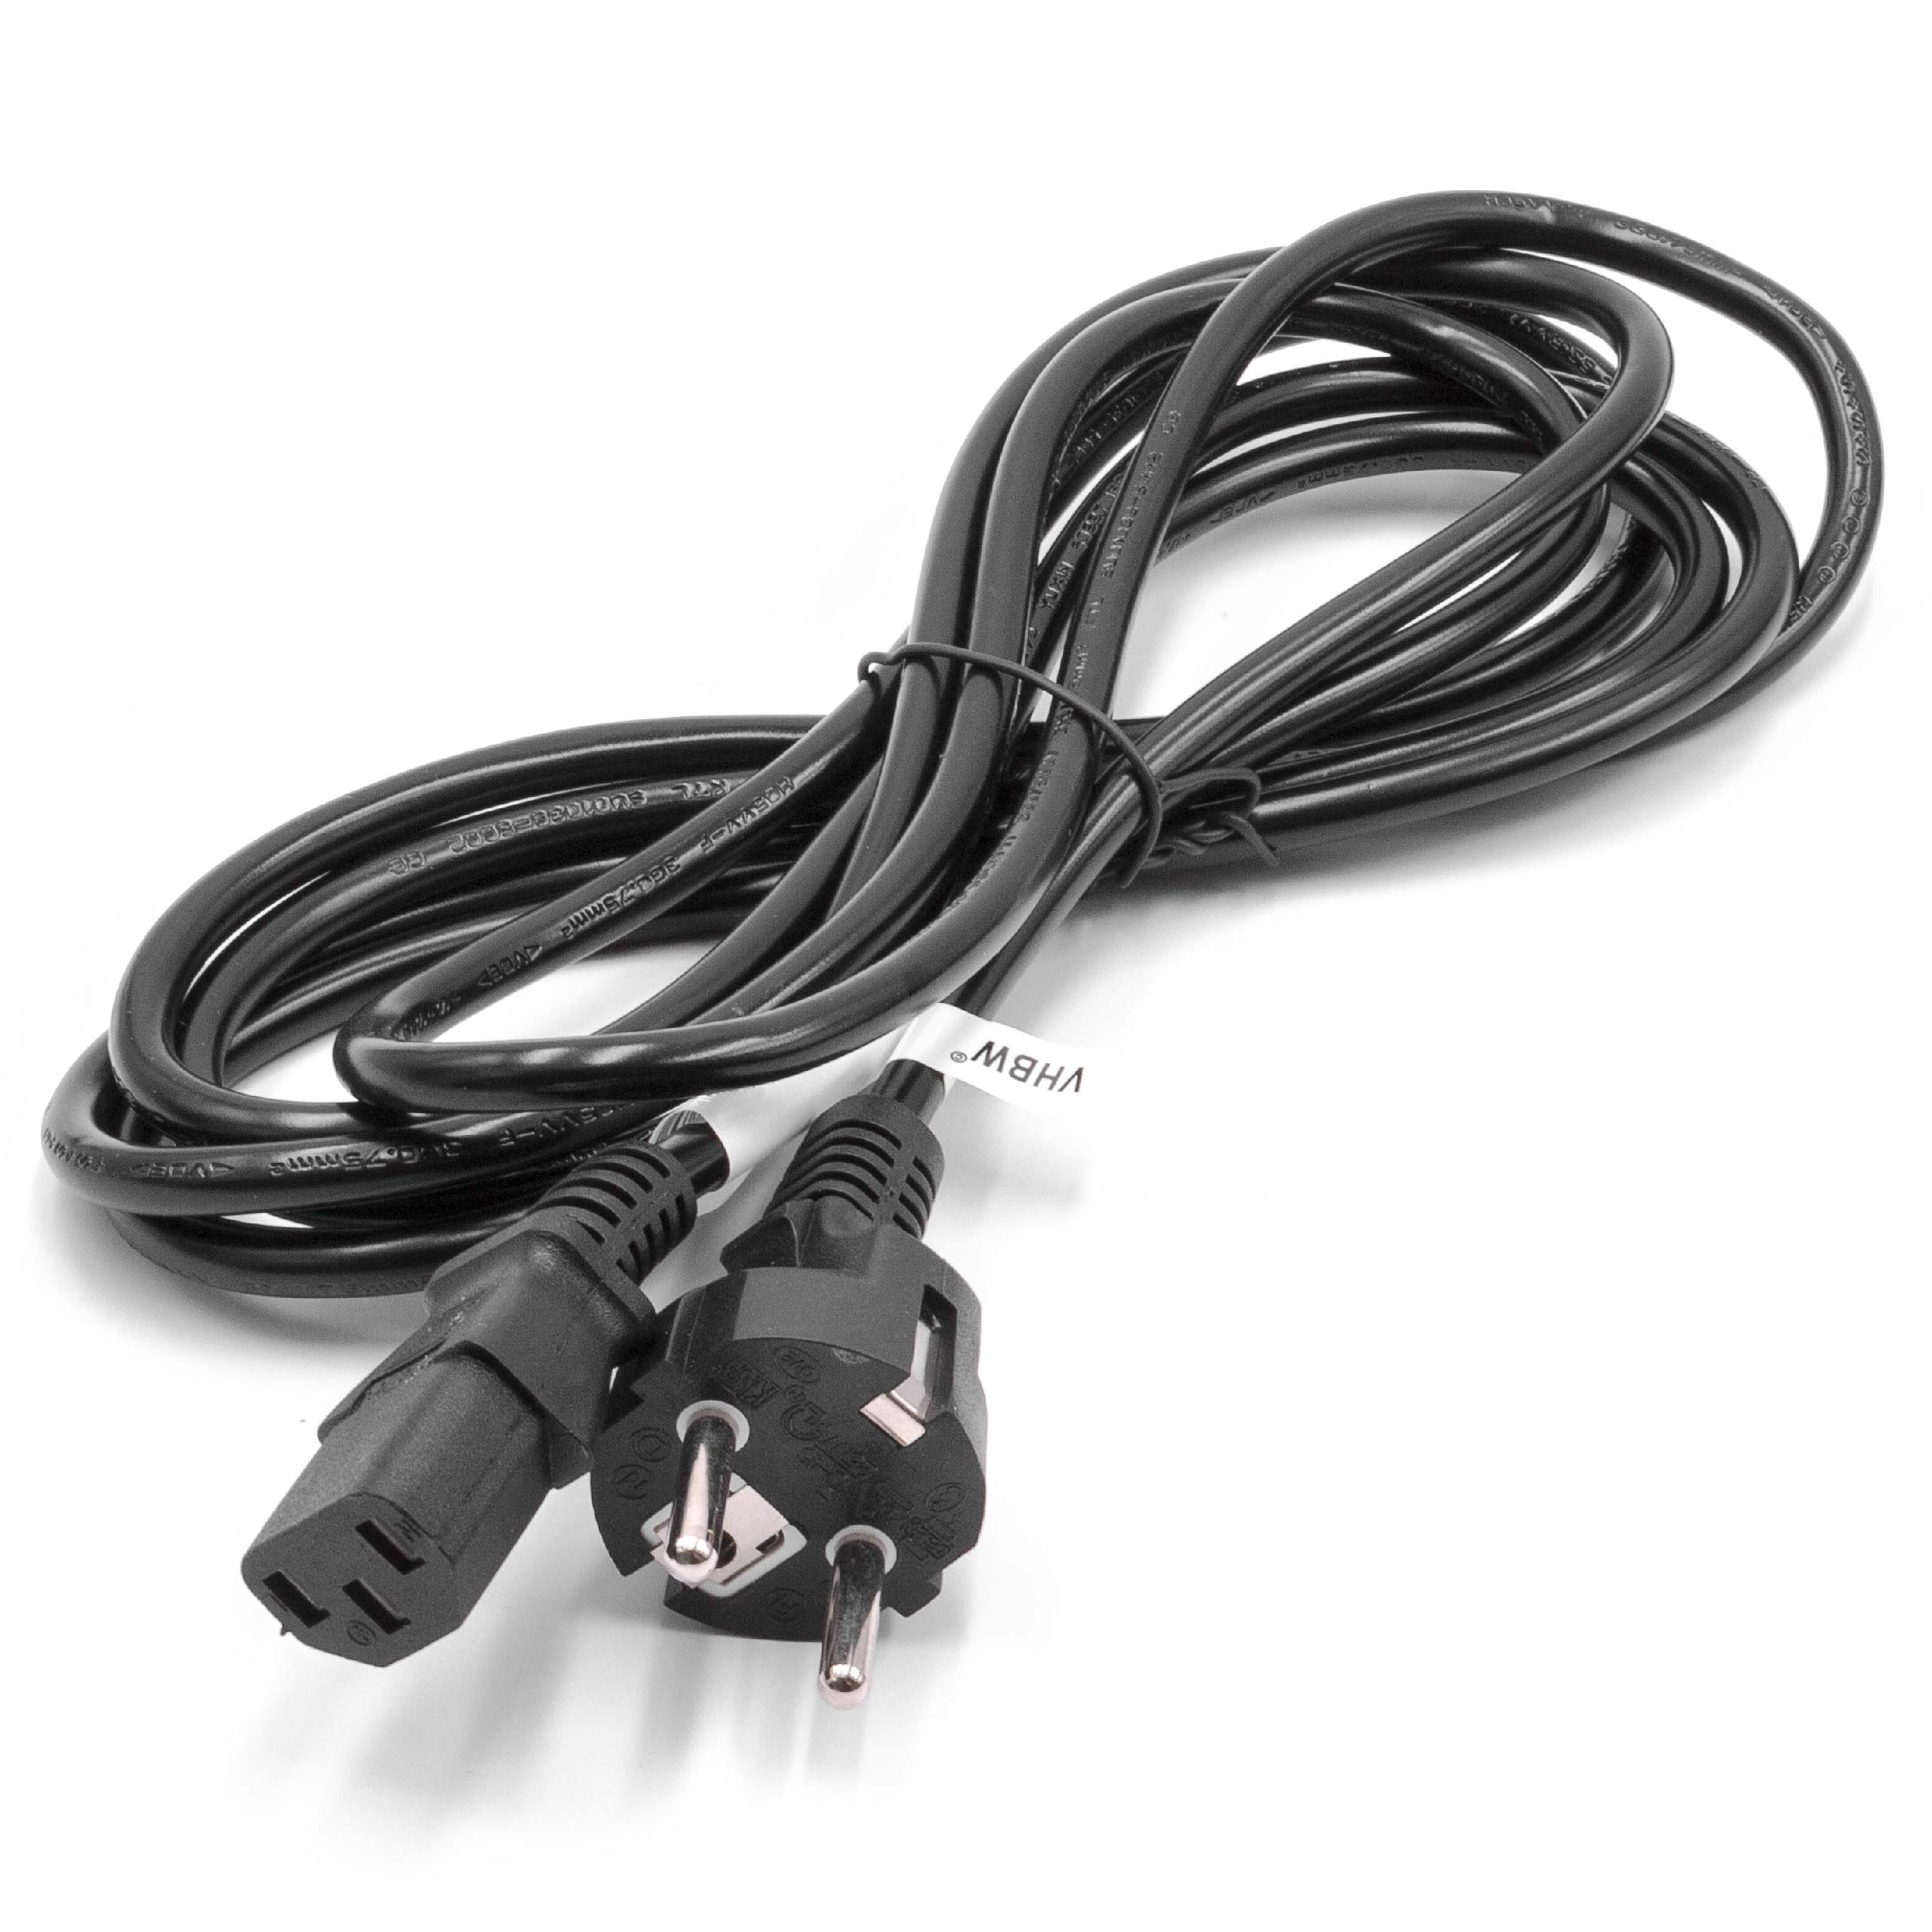 C13 Power Cable Euro Plug suitable for Devices e.g. PC Monitor Computer - 3 m